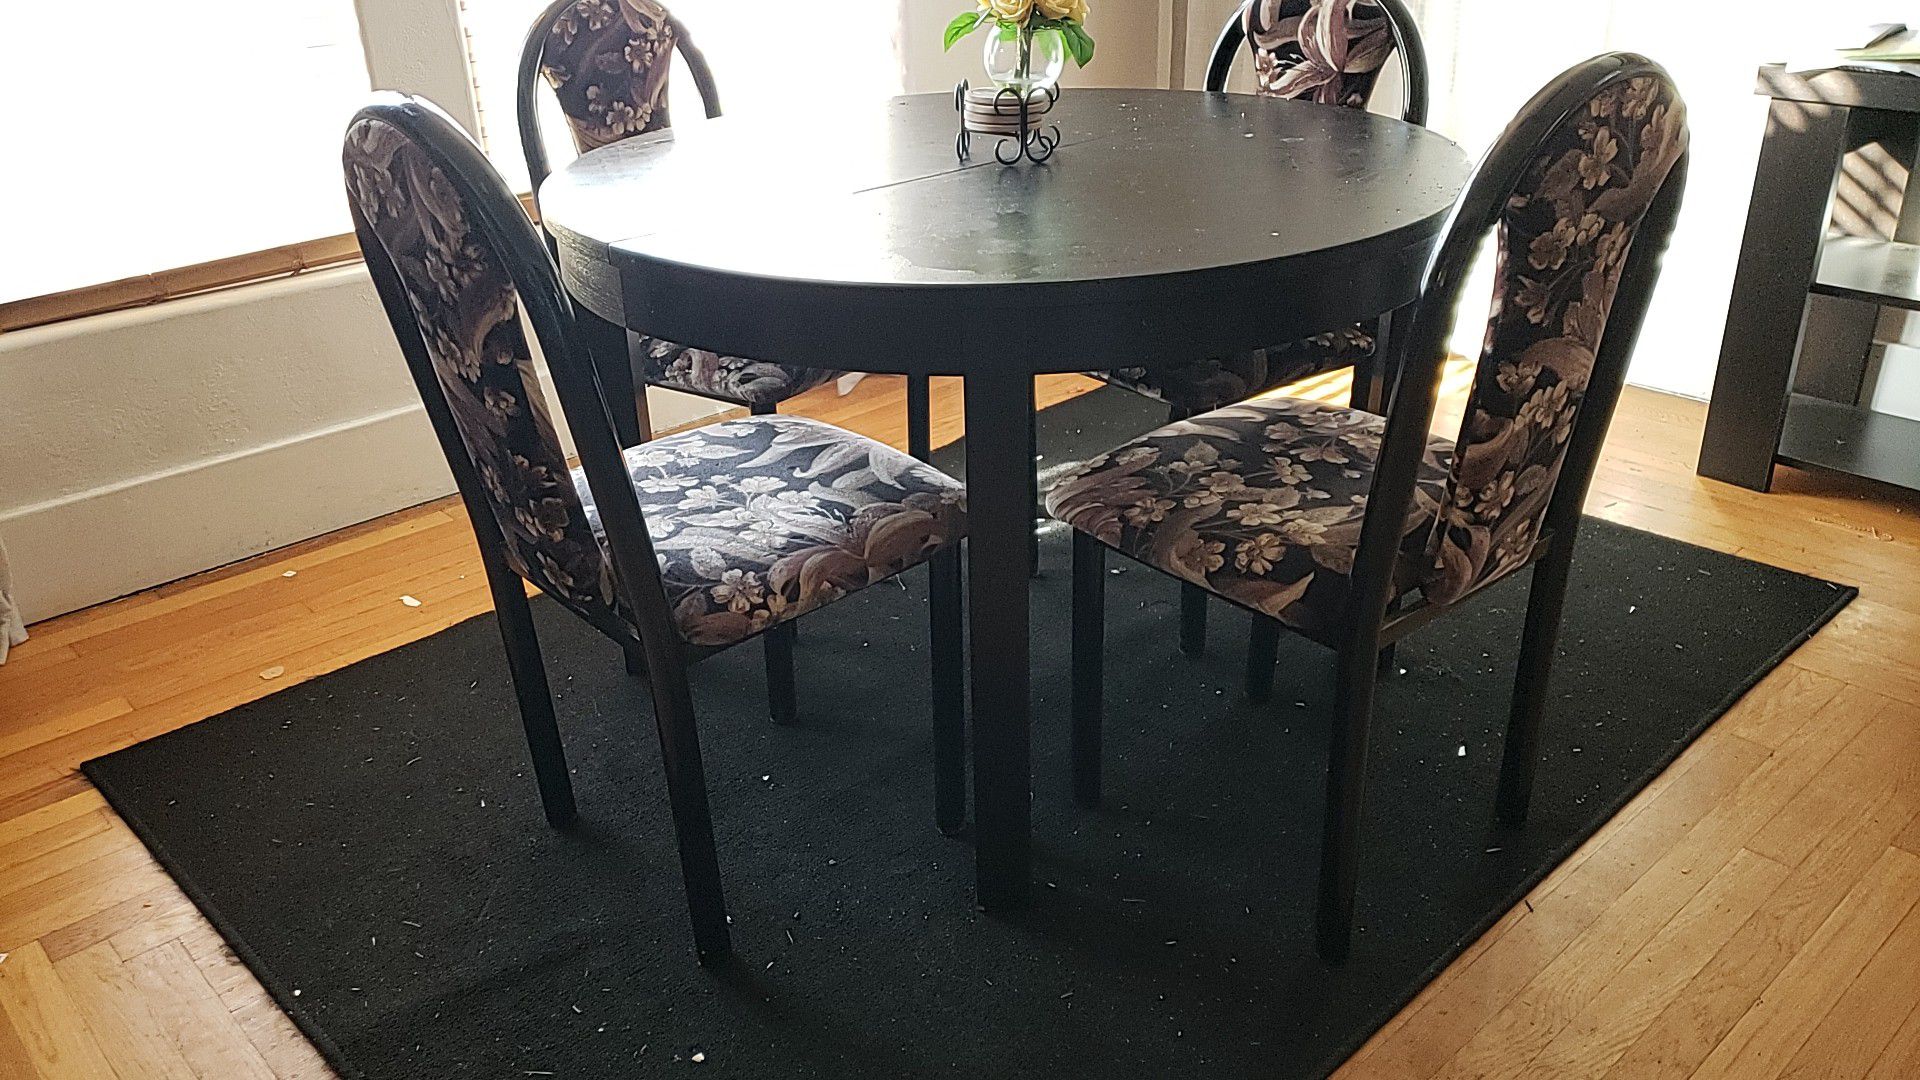 5 piece dinning set, the table is made out of wood chairs are metal